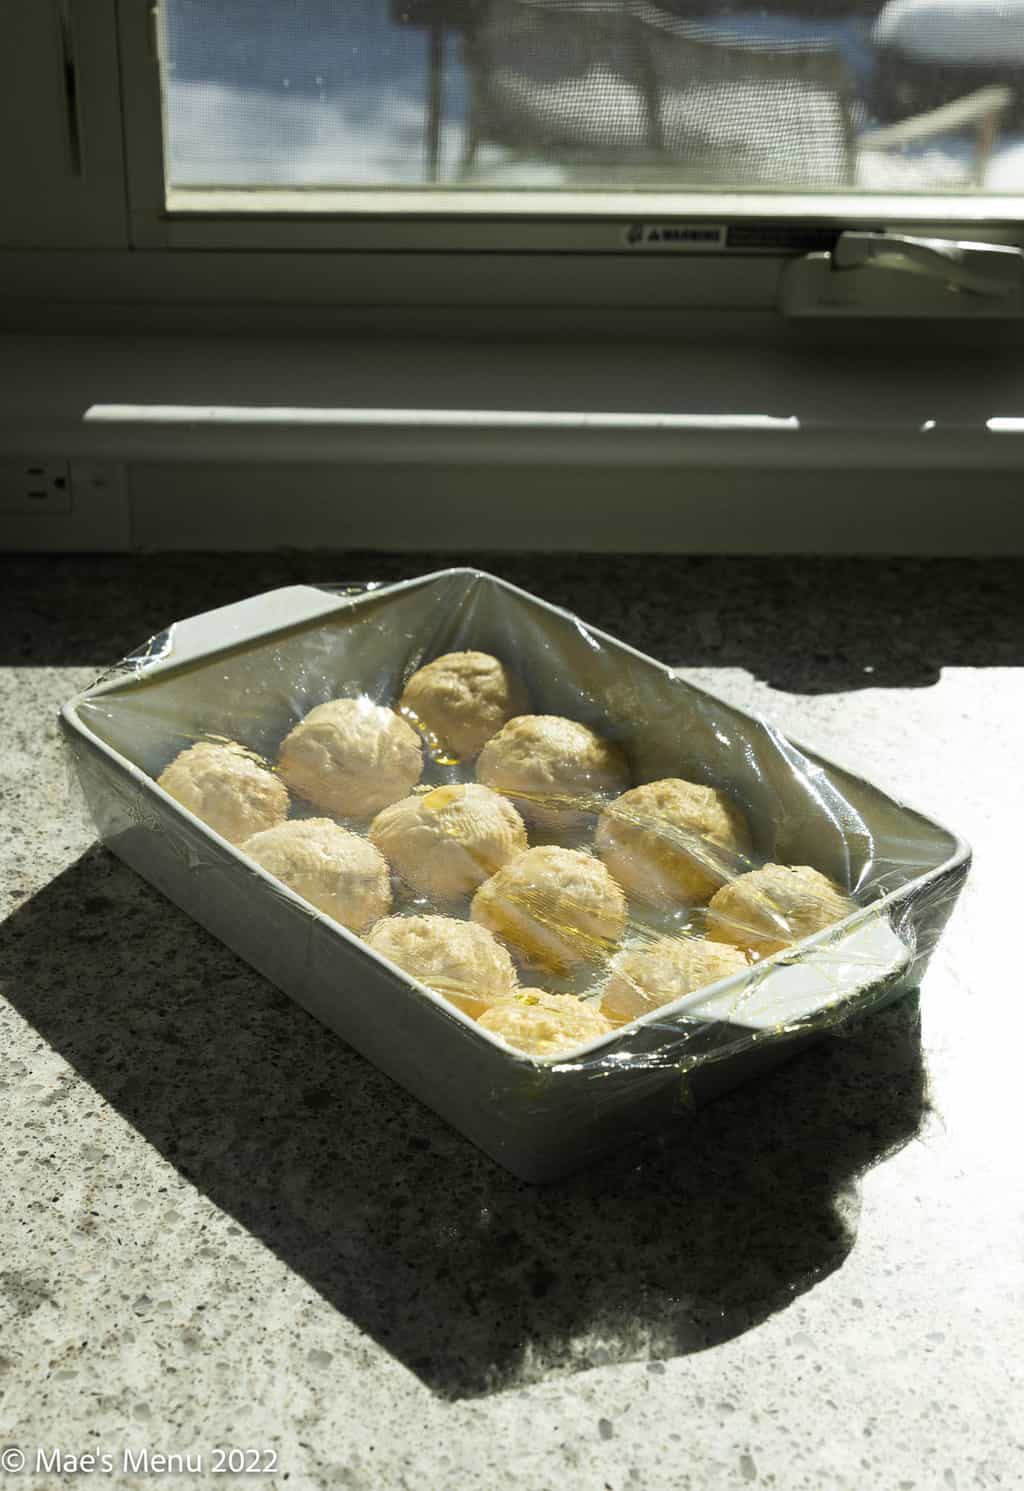 The pan of rolls proofing in the sun on the counter.